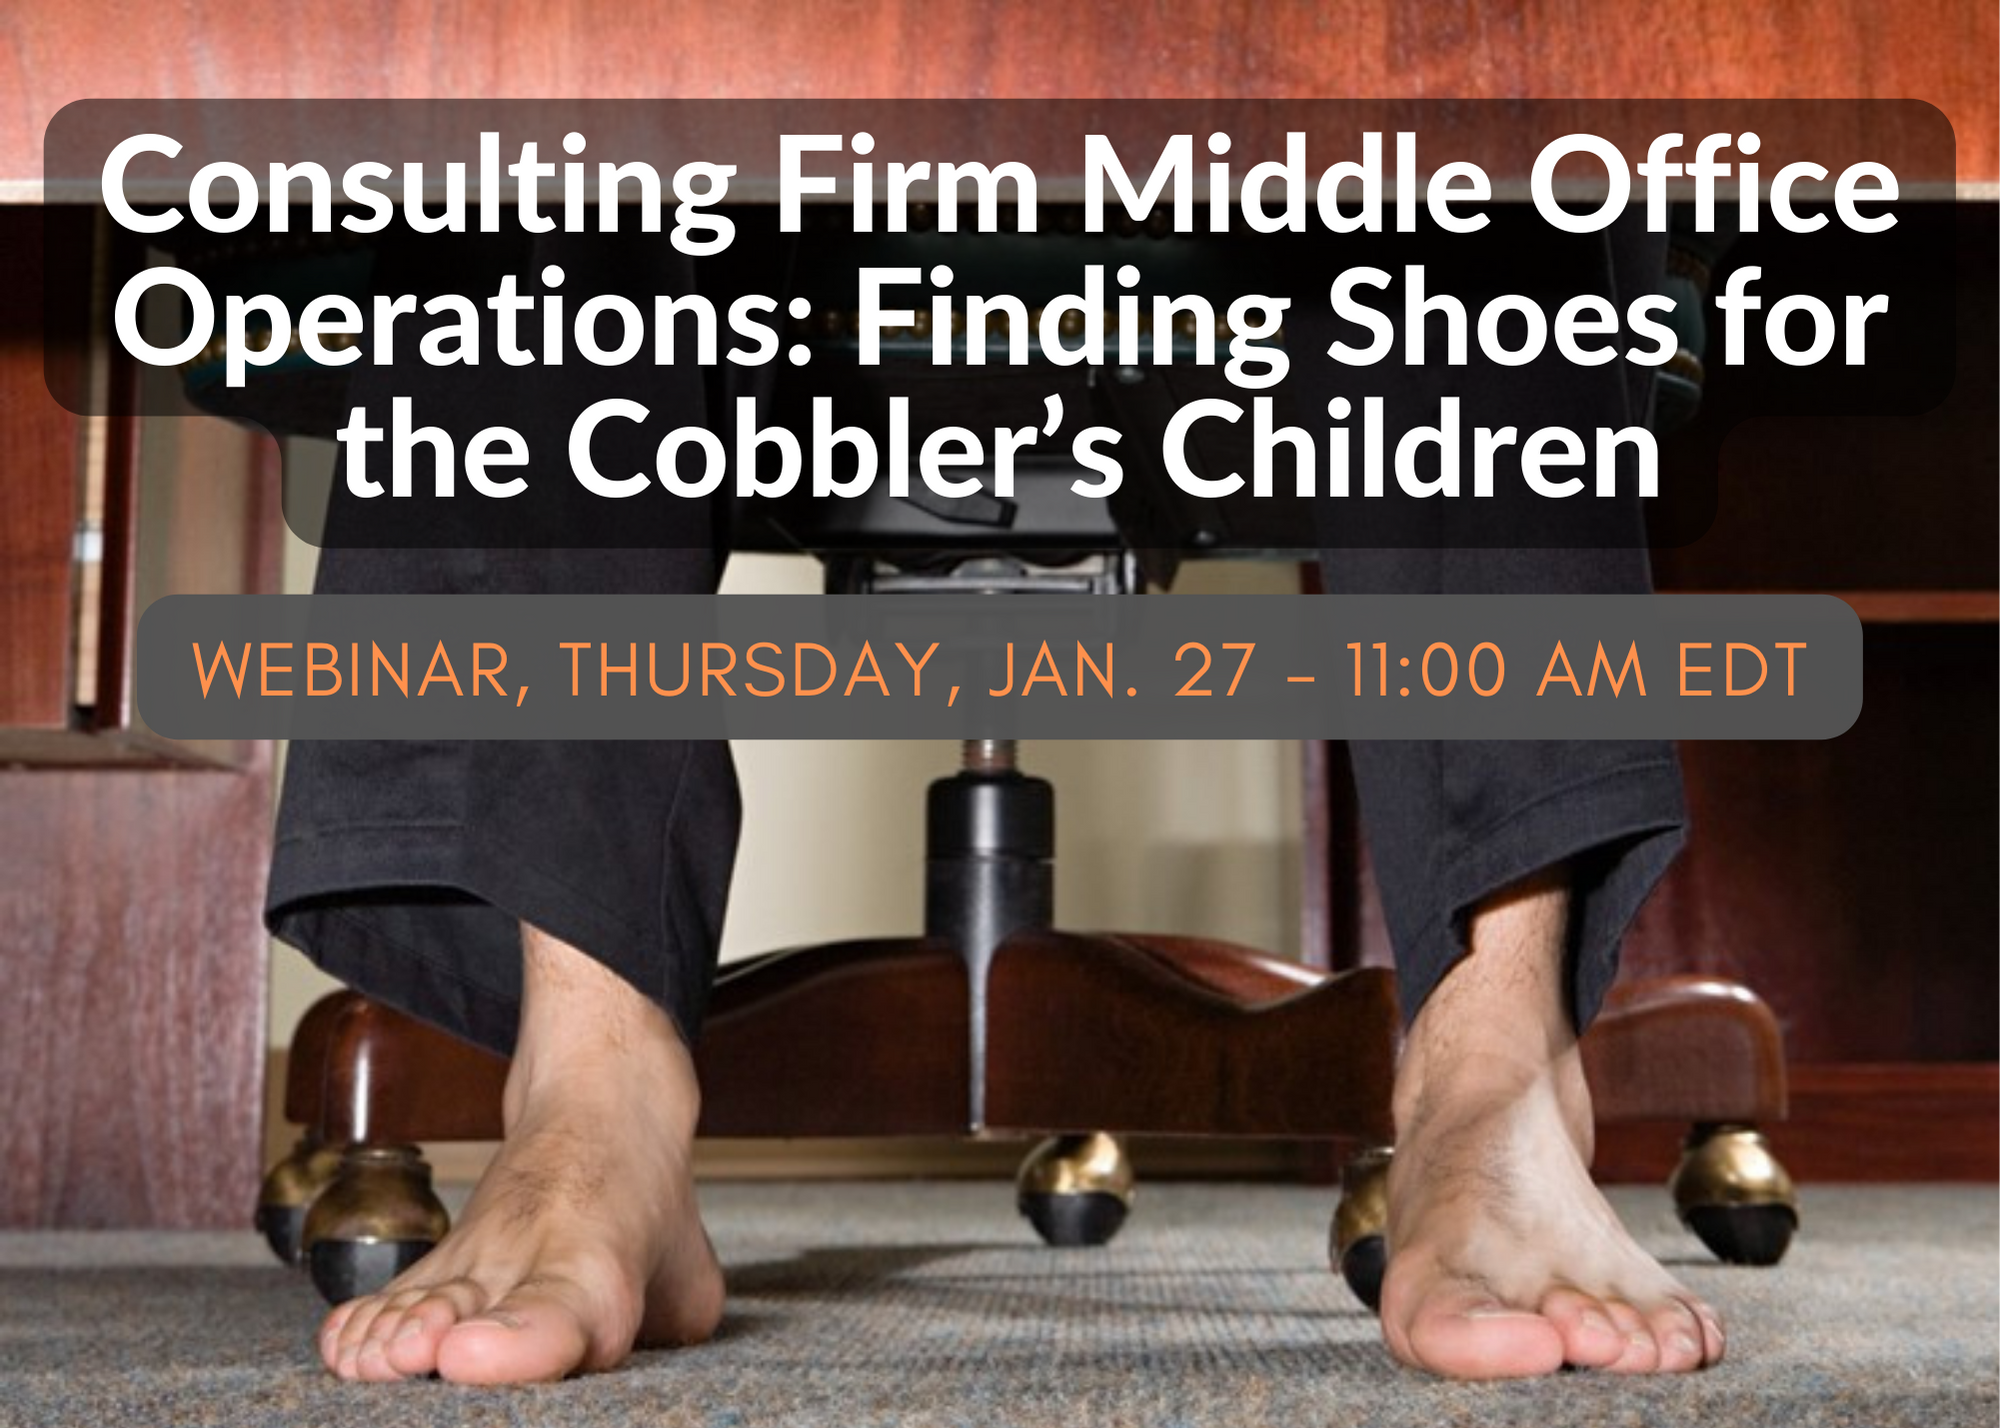 Key Takeaways: Consulting Firm Middle Office Operations: Finding Shoes for the Cobbler’s Children